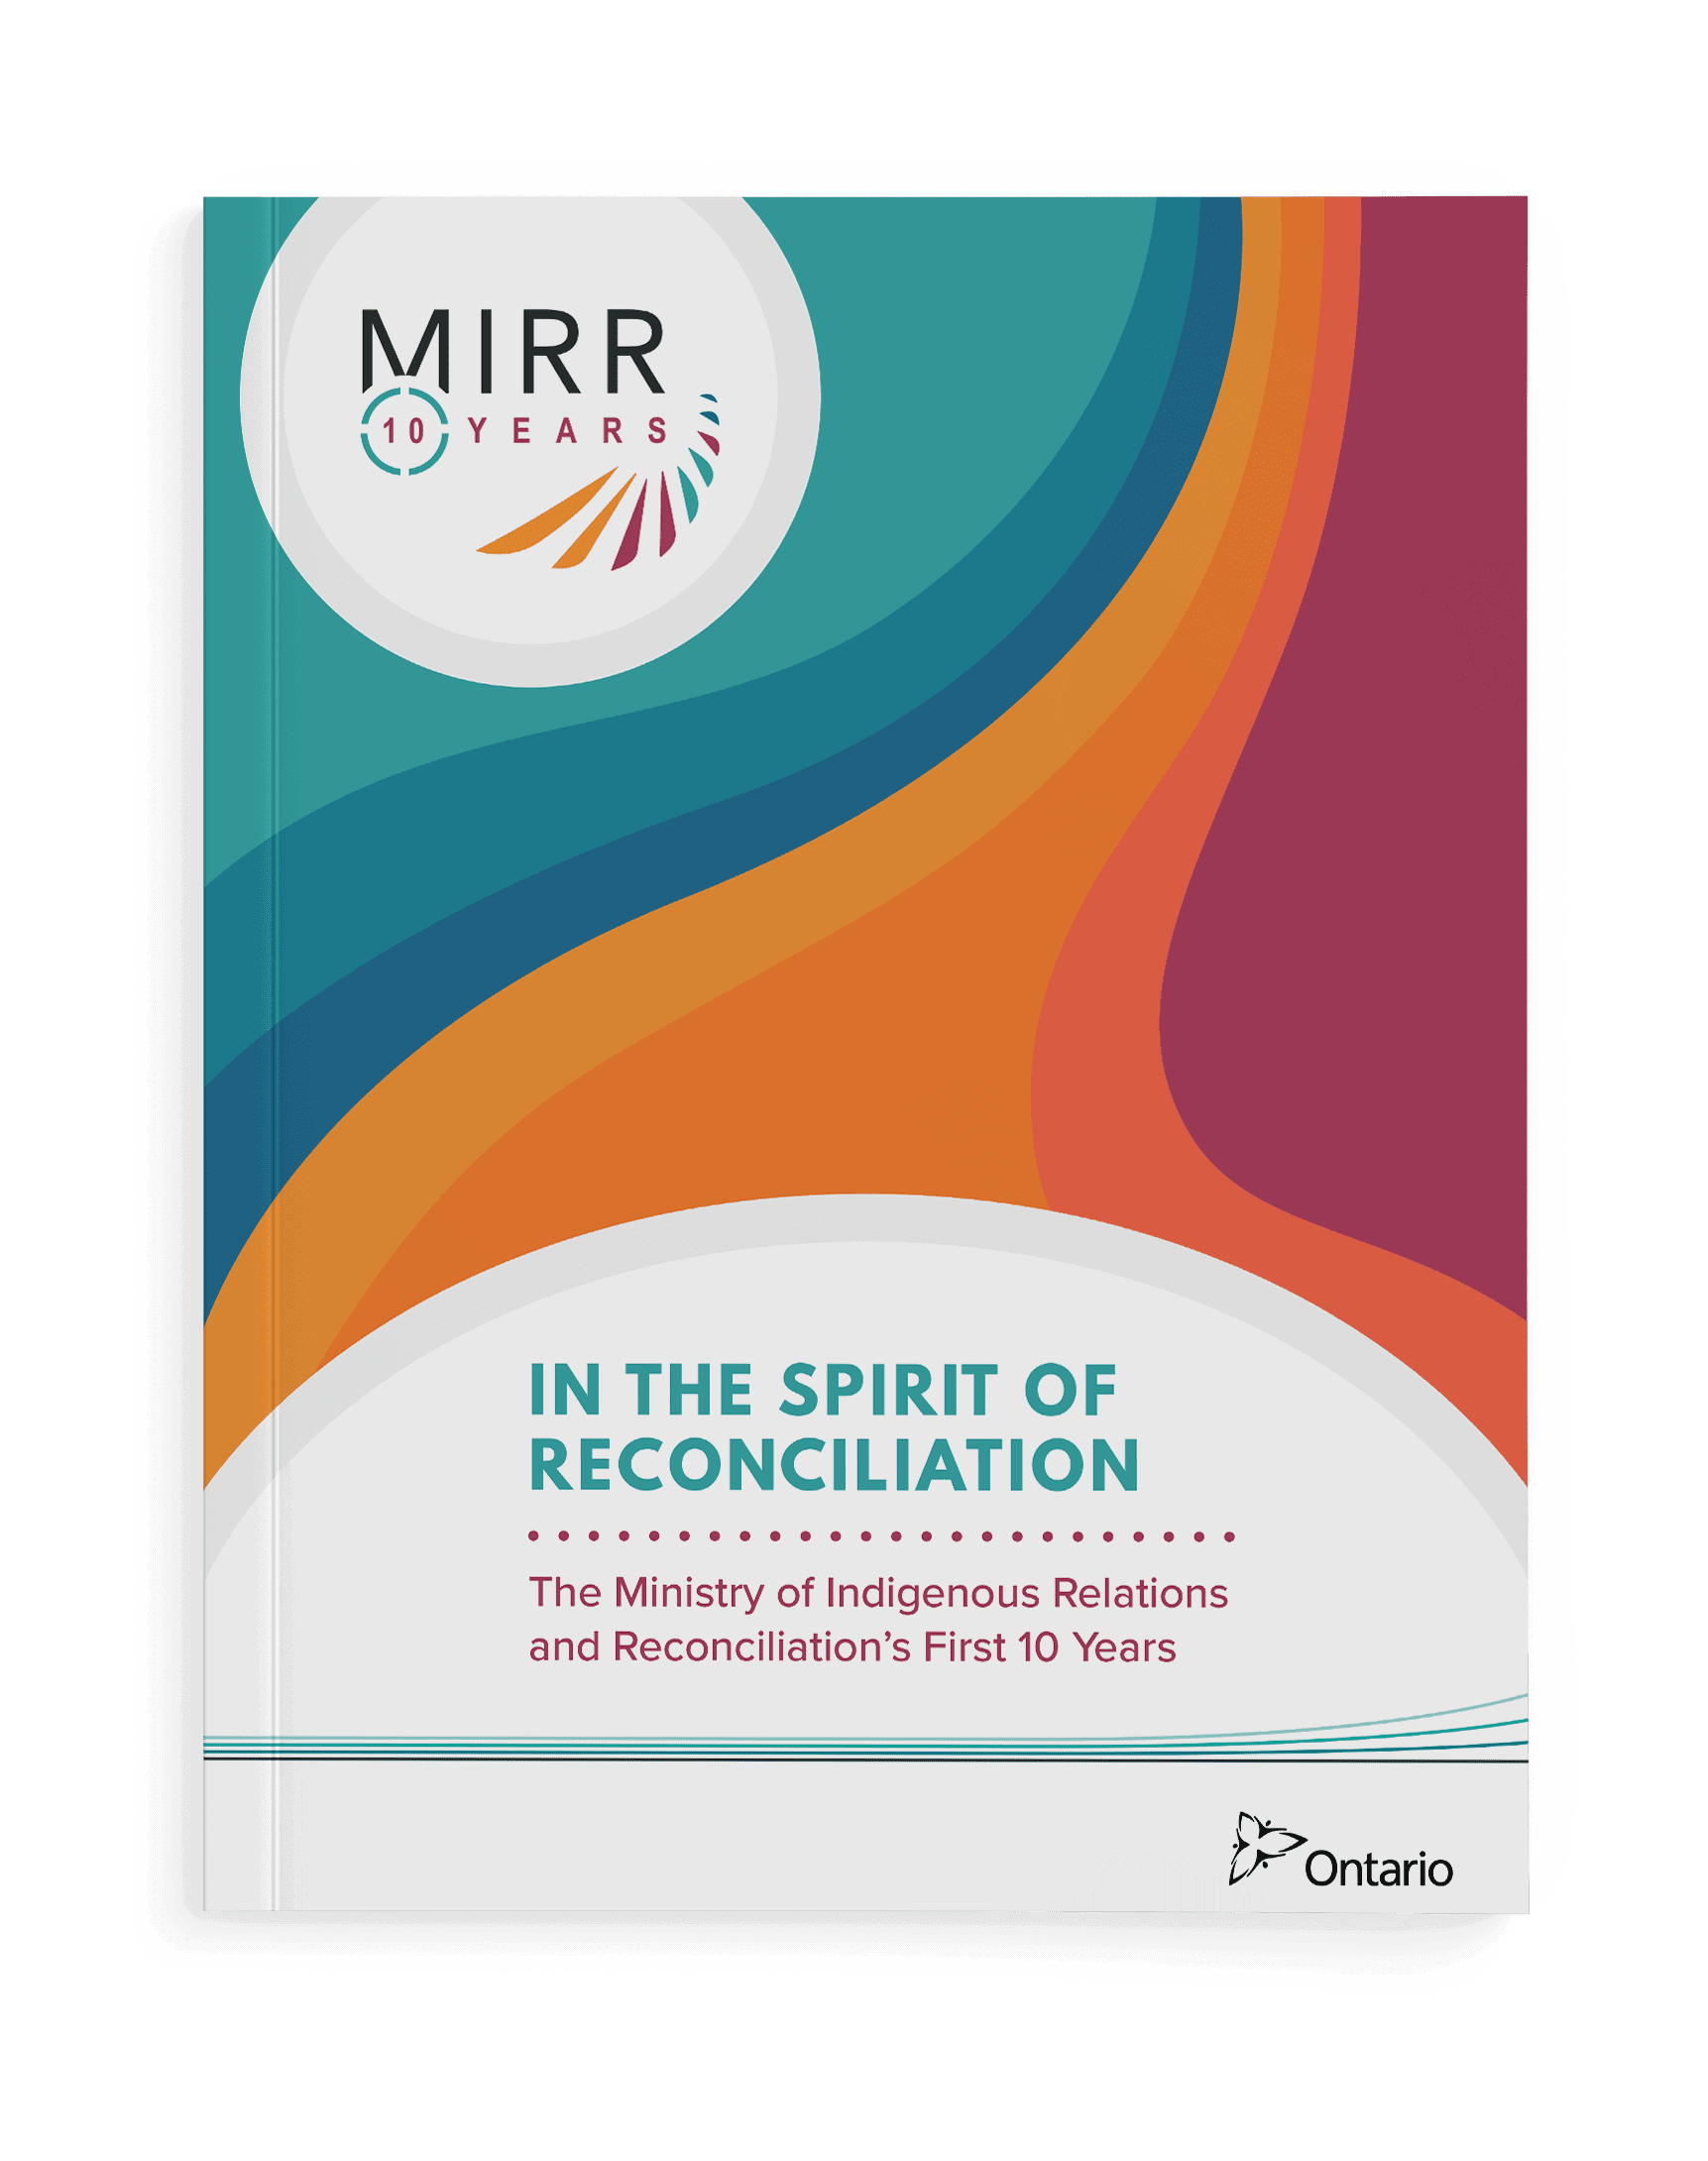 The cover of the Ministry of Indigenous Relations and Reconciliation's First 10 Years book. The MIRR logo is in the top left corner in a white circle. The logo reads MIRR 10 years, and features a colourful series of lines in a radial arrangement encircling the word years. The background of the cover is a wavy rainbow, starting with teal on the left, transitioning to orange, and then to a purple-red. In a semi circle at the bottom of the page it reads 'In the spirit of reconciliation: The Ministry of Indigenous Relations and Reconciliation's First 10 years' The government of Ontario logo is in the bottom right corner.